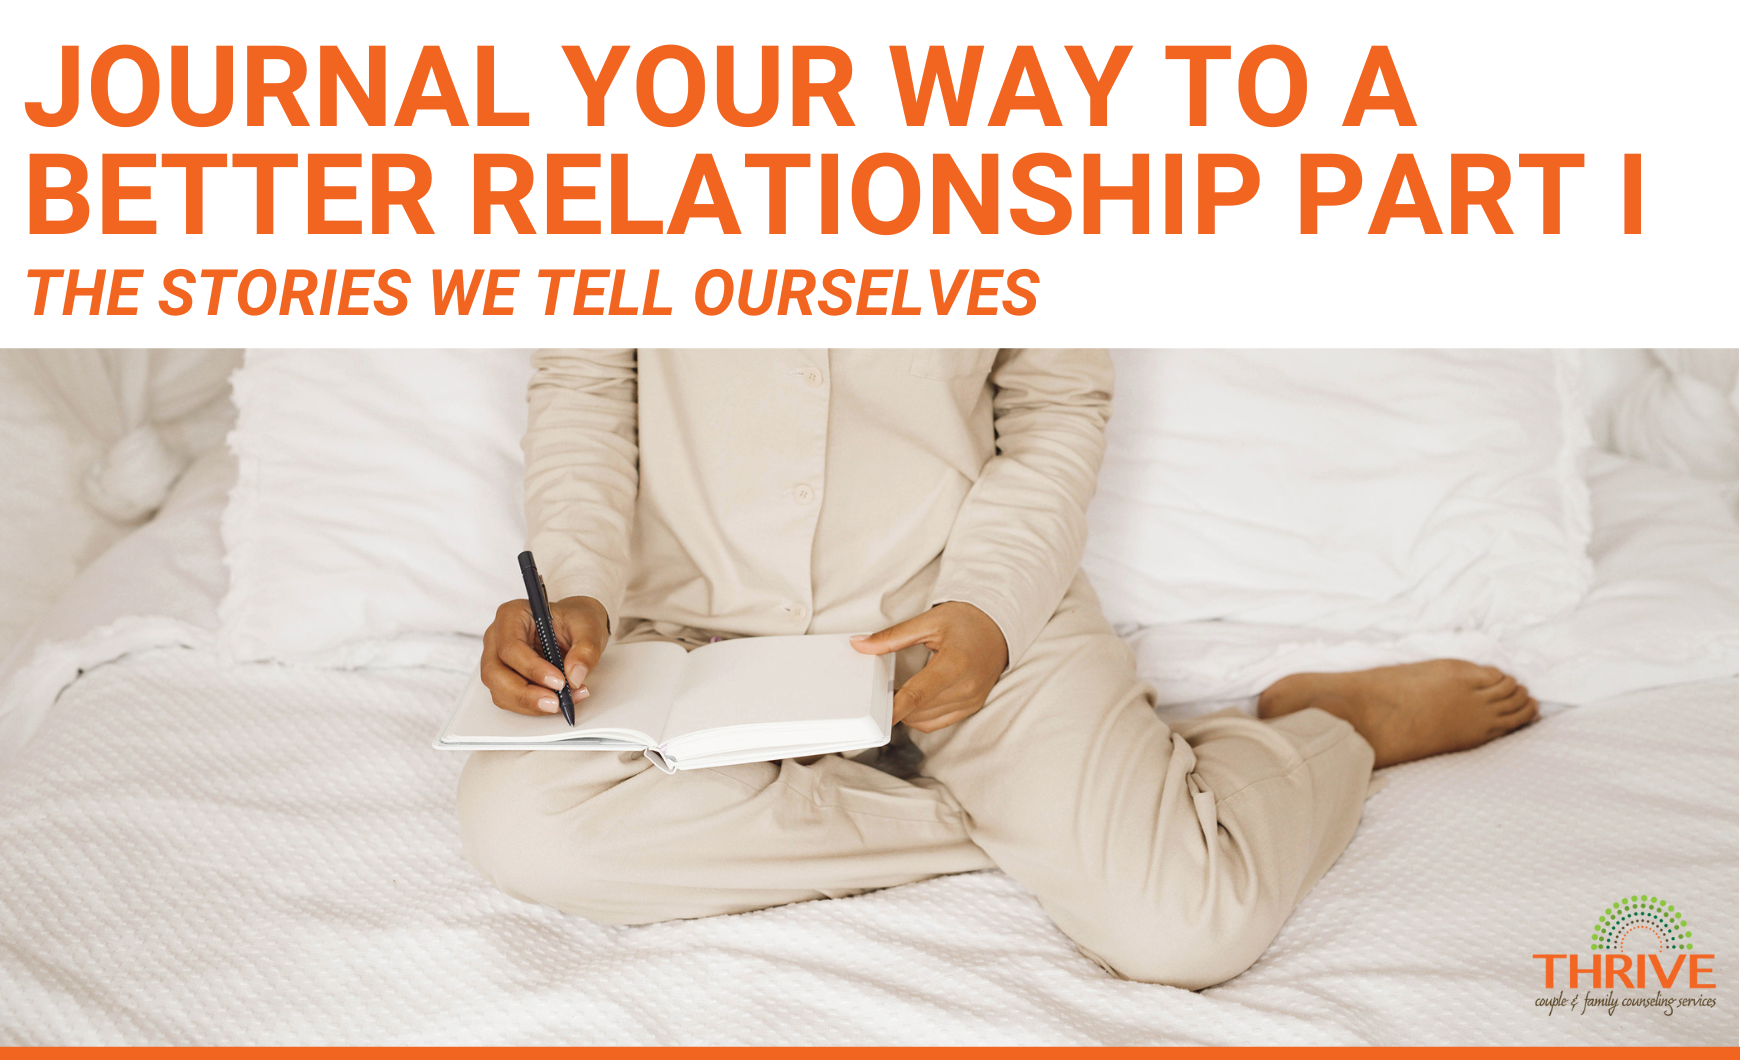 Journal Your Way to a Better Relationship